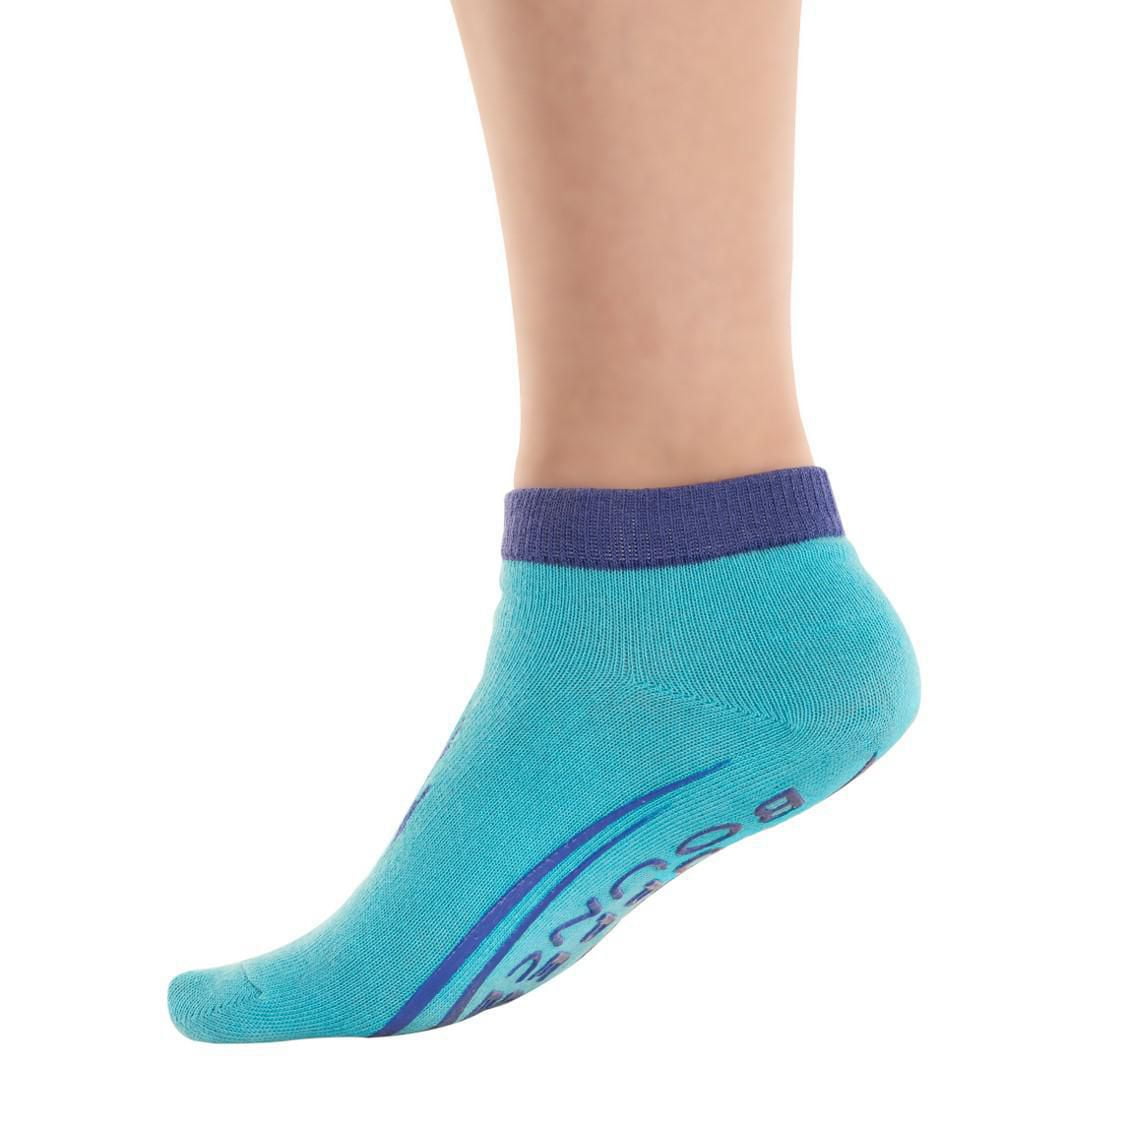 Wholesale Bounce Grip Socks for Trampoline In A Range Of Cuts And